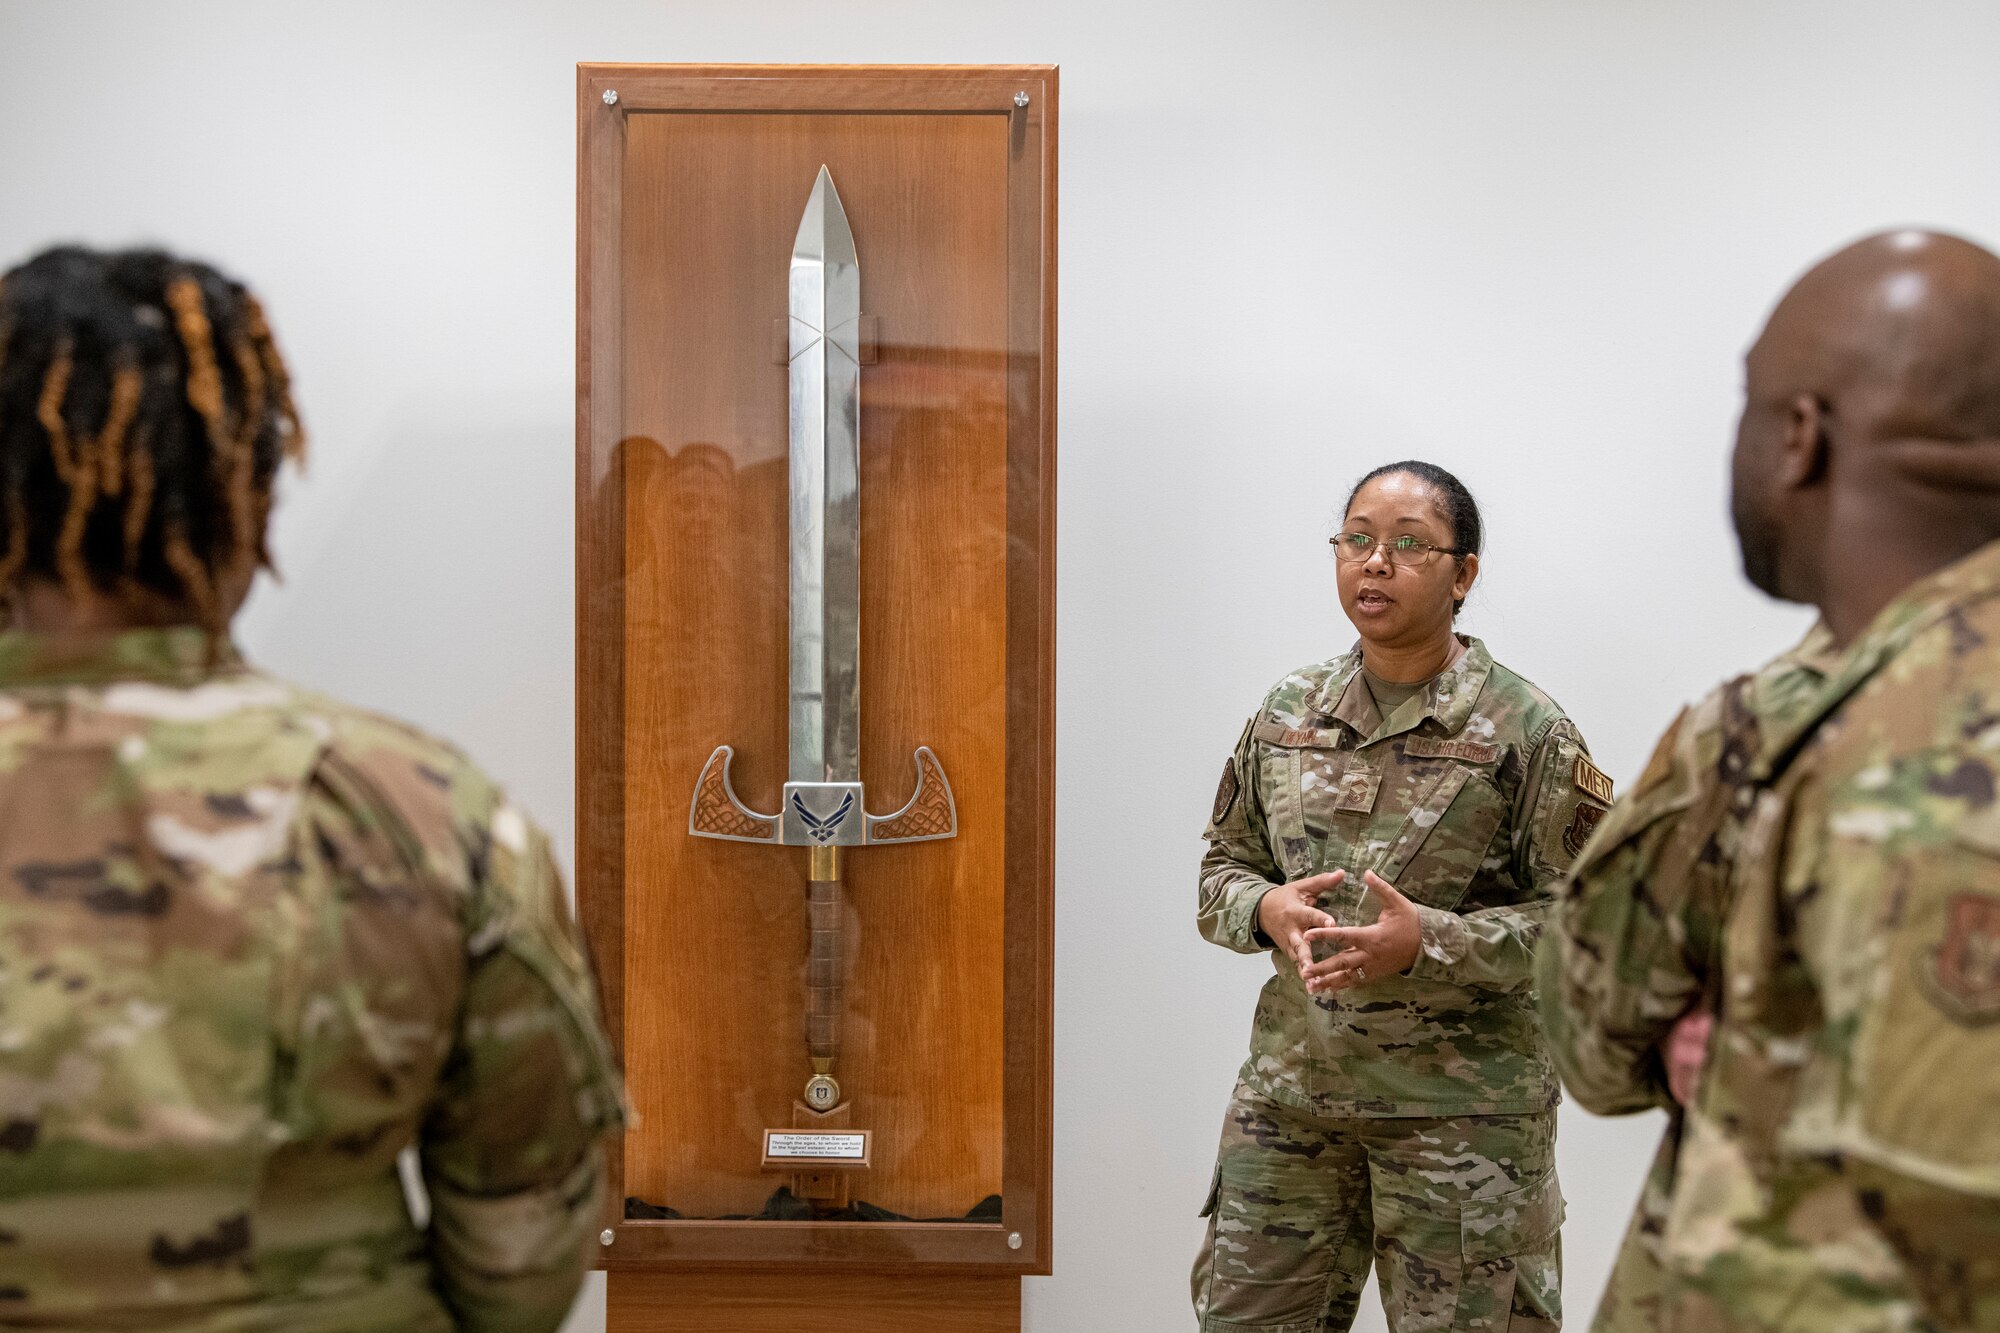 U.S. Air Force Senior Master Sgt. Virginia Wynn, PDC Enlisted Professional Development manager, speaks to students from the NCO Leadership Development course about the importance and history of The Order of the Sword on the last day of class at Robins Air Force Base, Georgia, March 31, 2023.